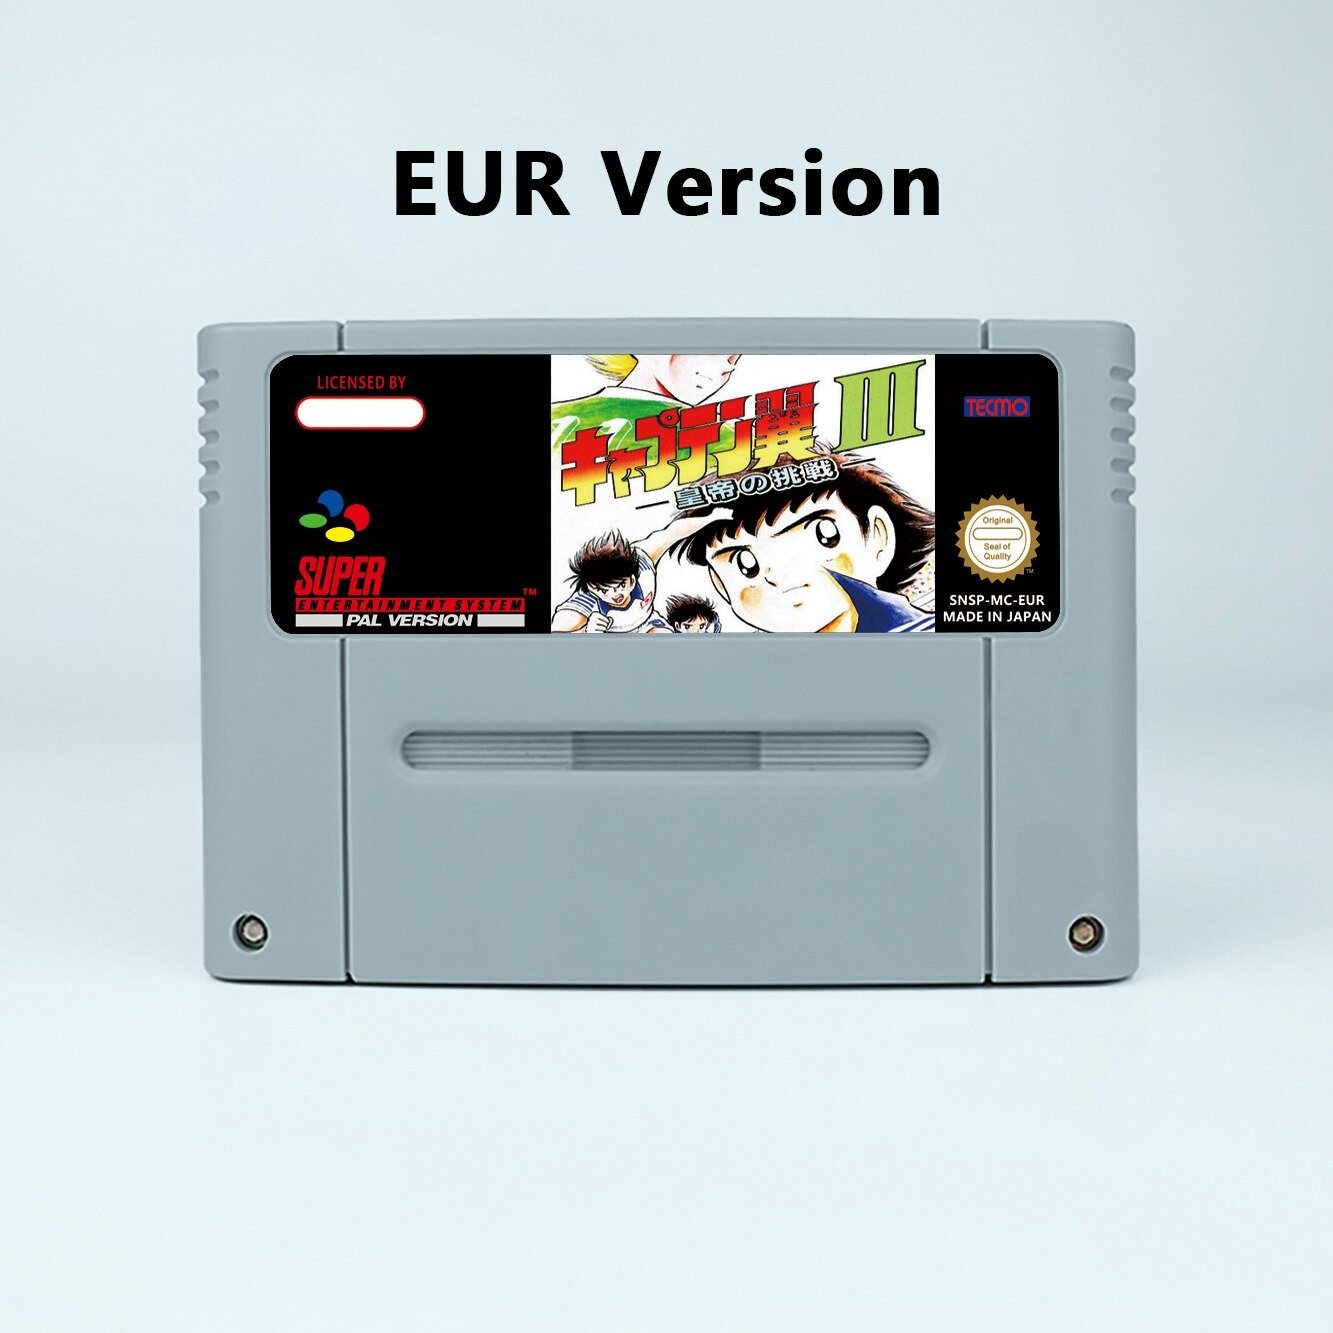 Captain Tsubasa III - Challenge of Kaiser Action Game EUR Version Cartridge for SNES Game Consoles